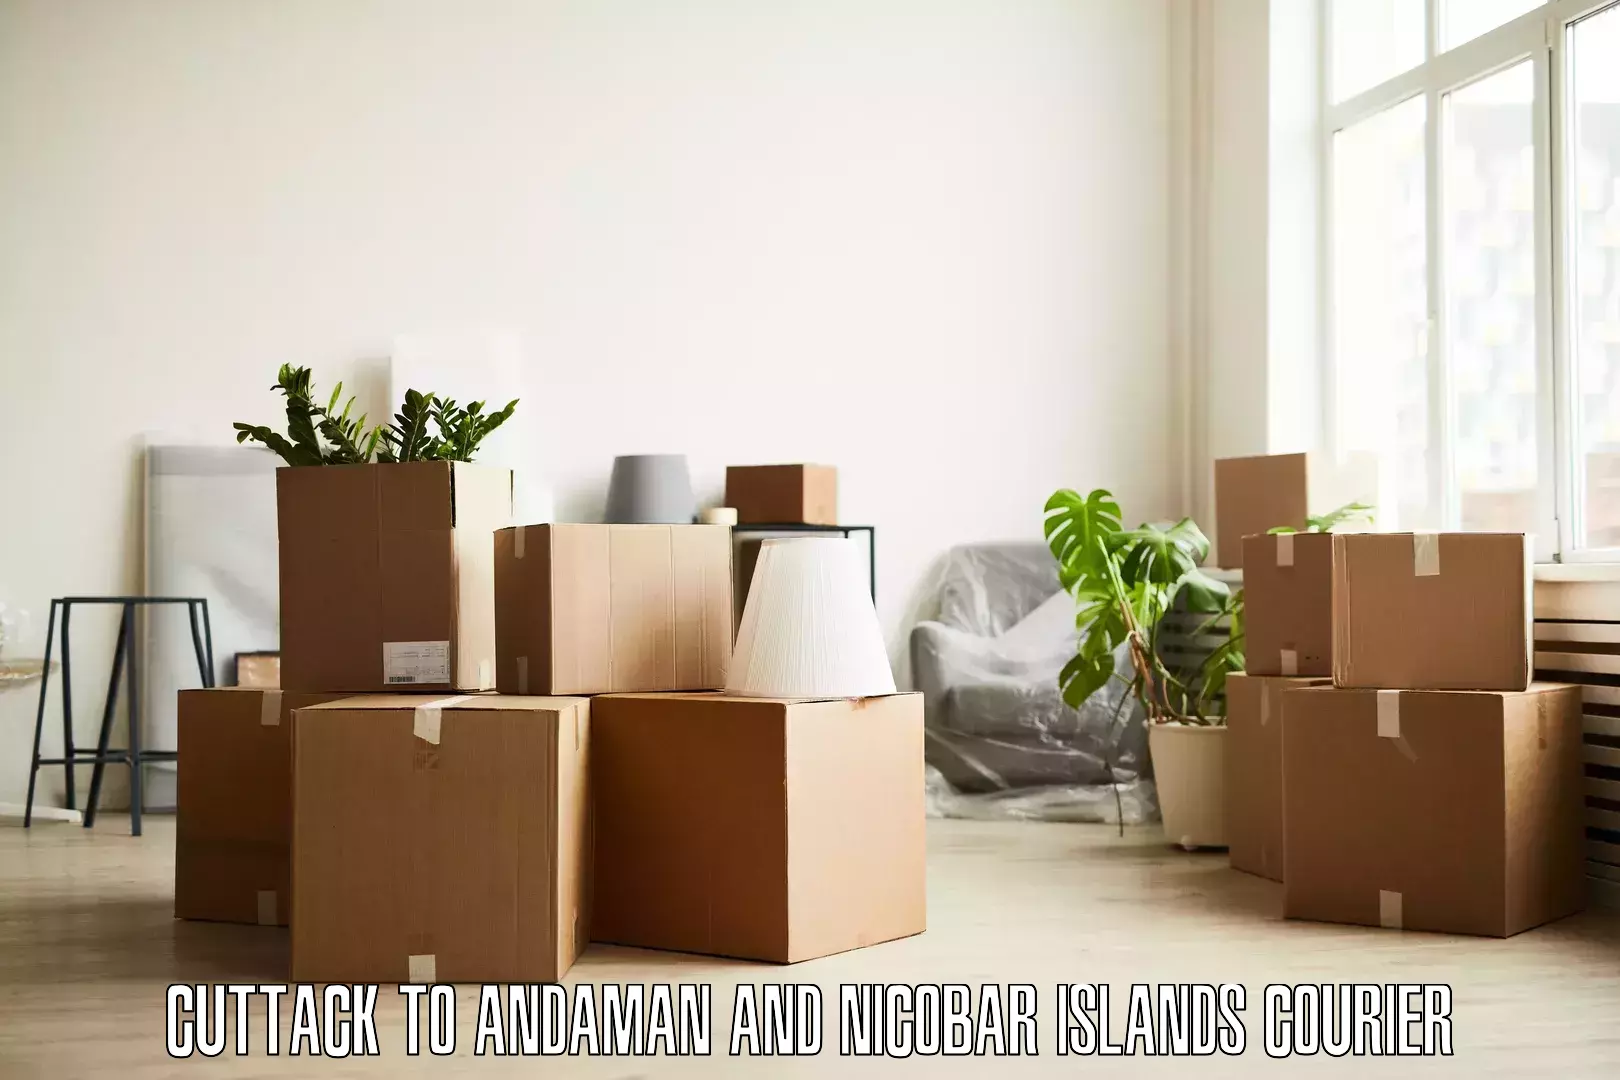 Stress-free household moving Cuttack to Andaman and Nicobar Islands